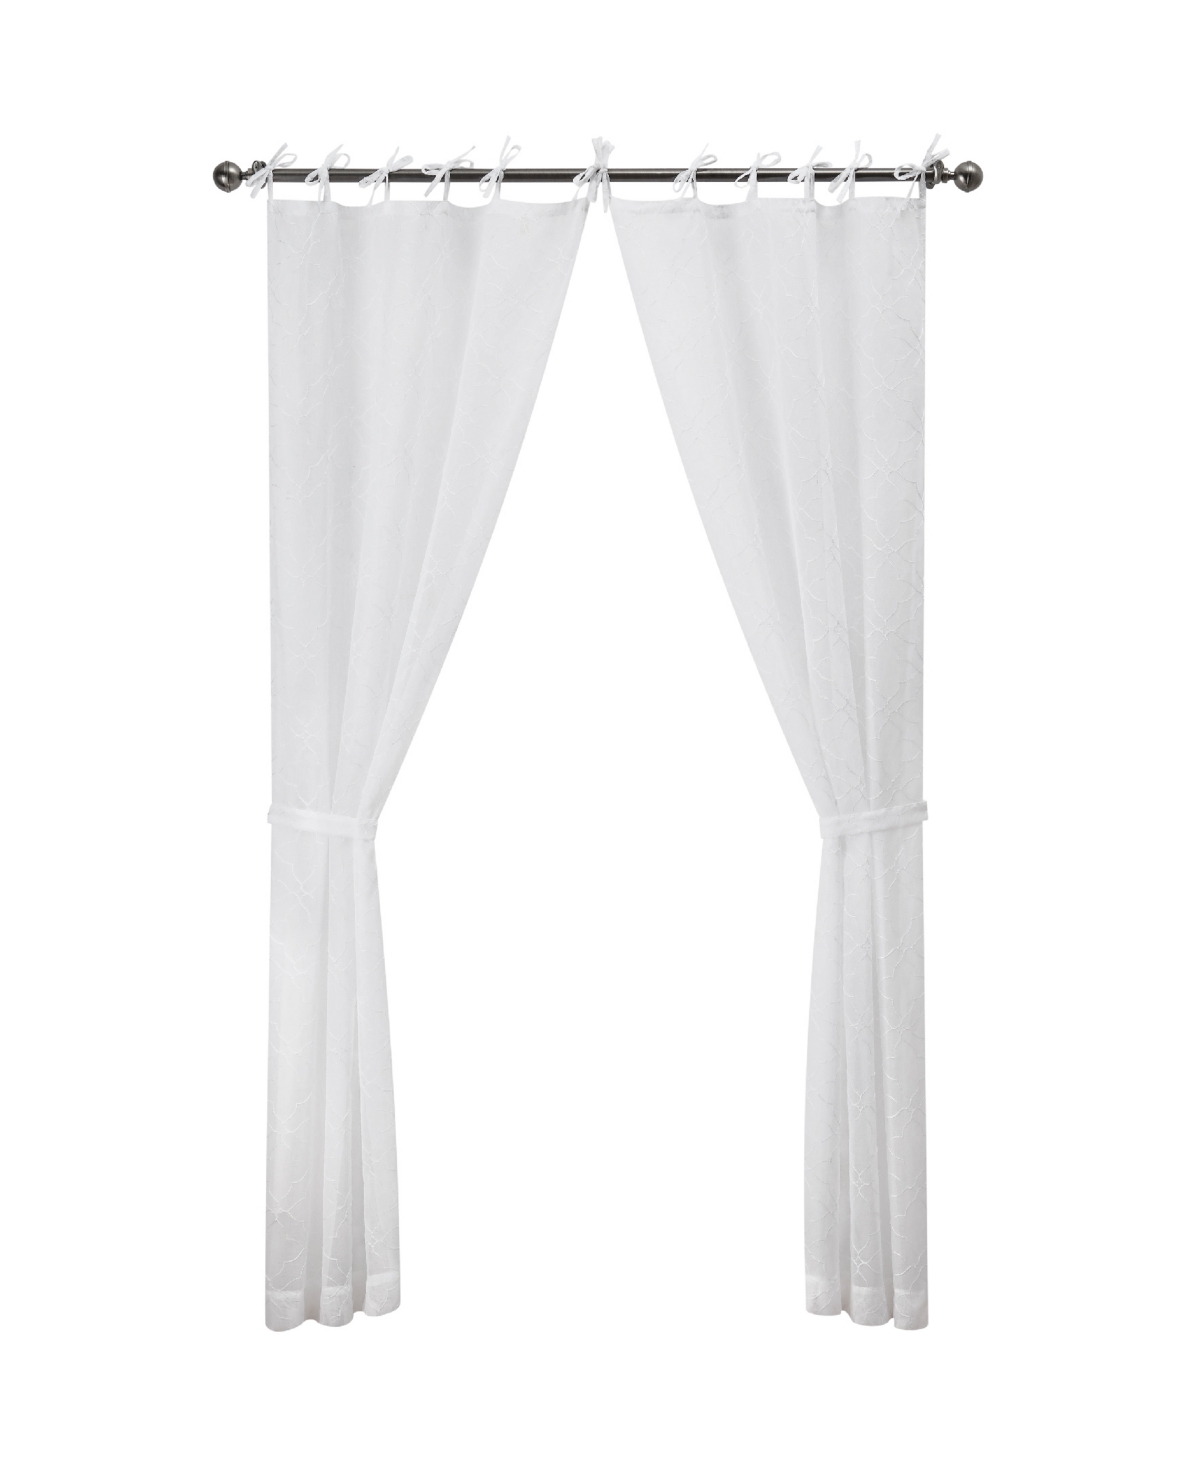 Jessica Simpson Nora Embroidery Sheer Tie Top Window Curtain Panel Pair With Tiebacks, 38" X 84" In White